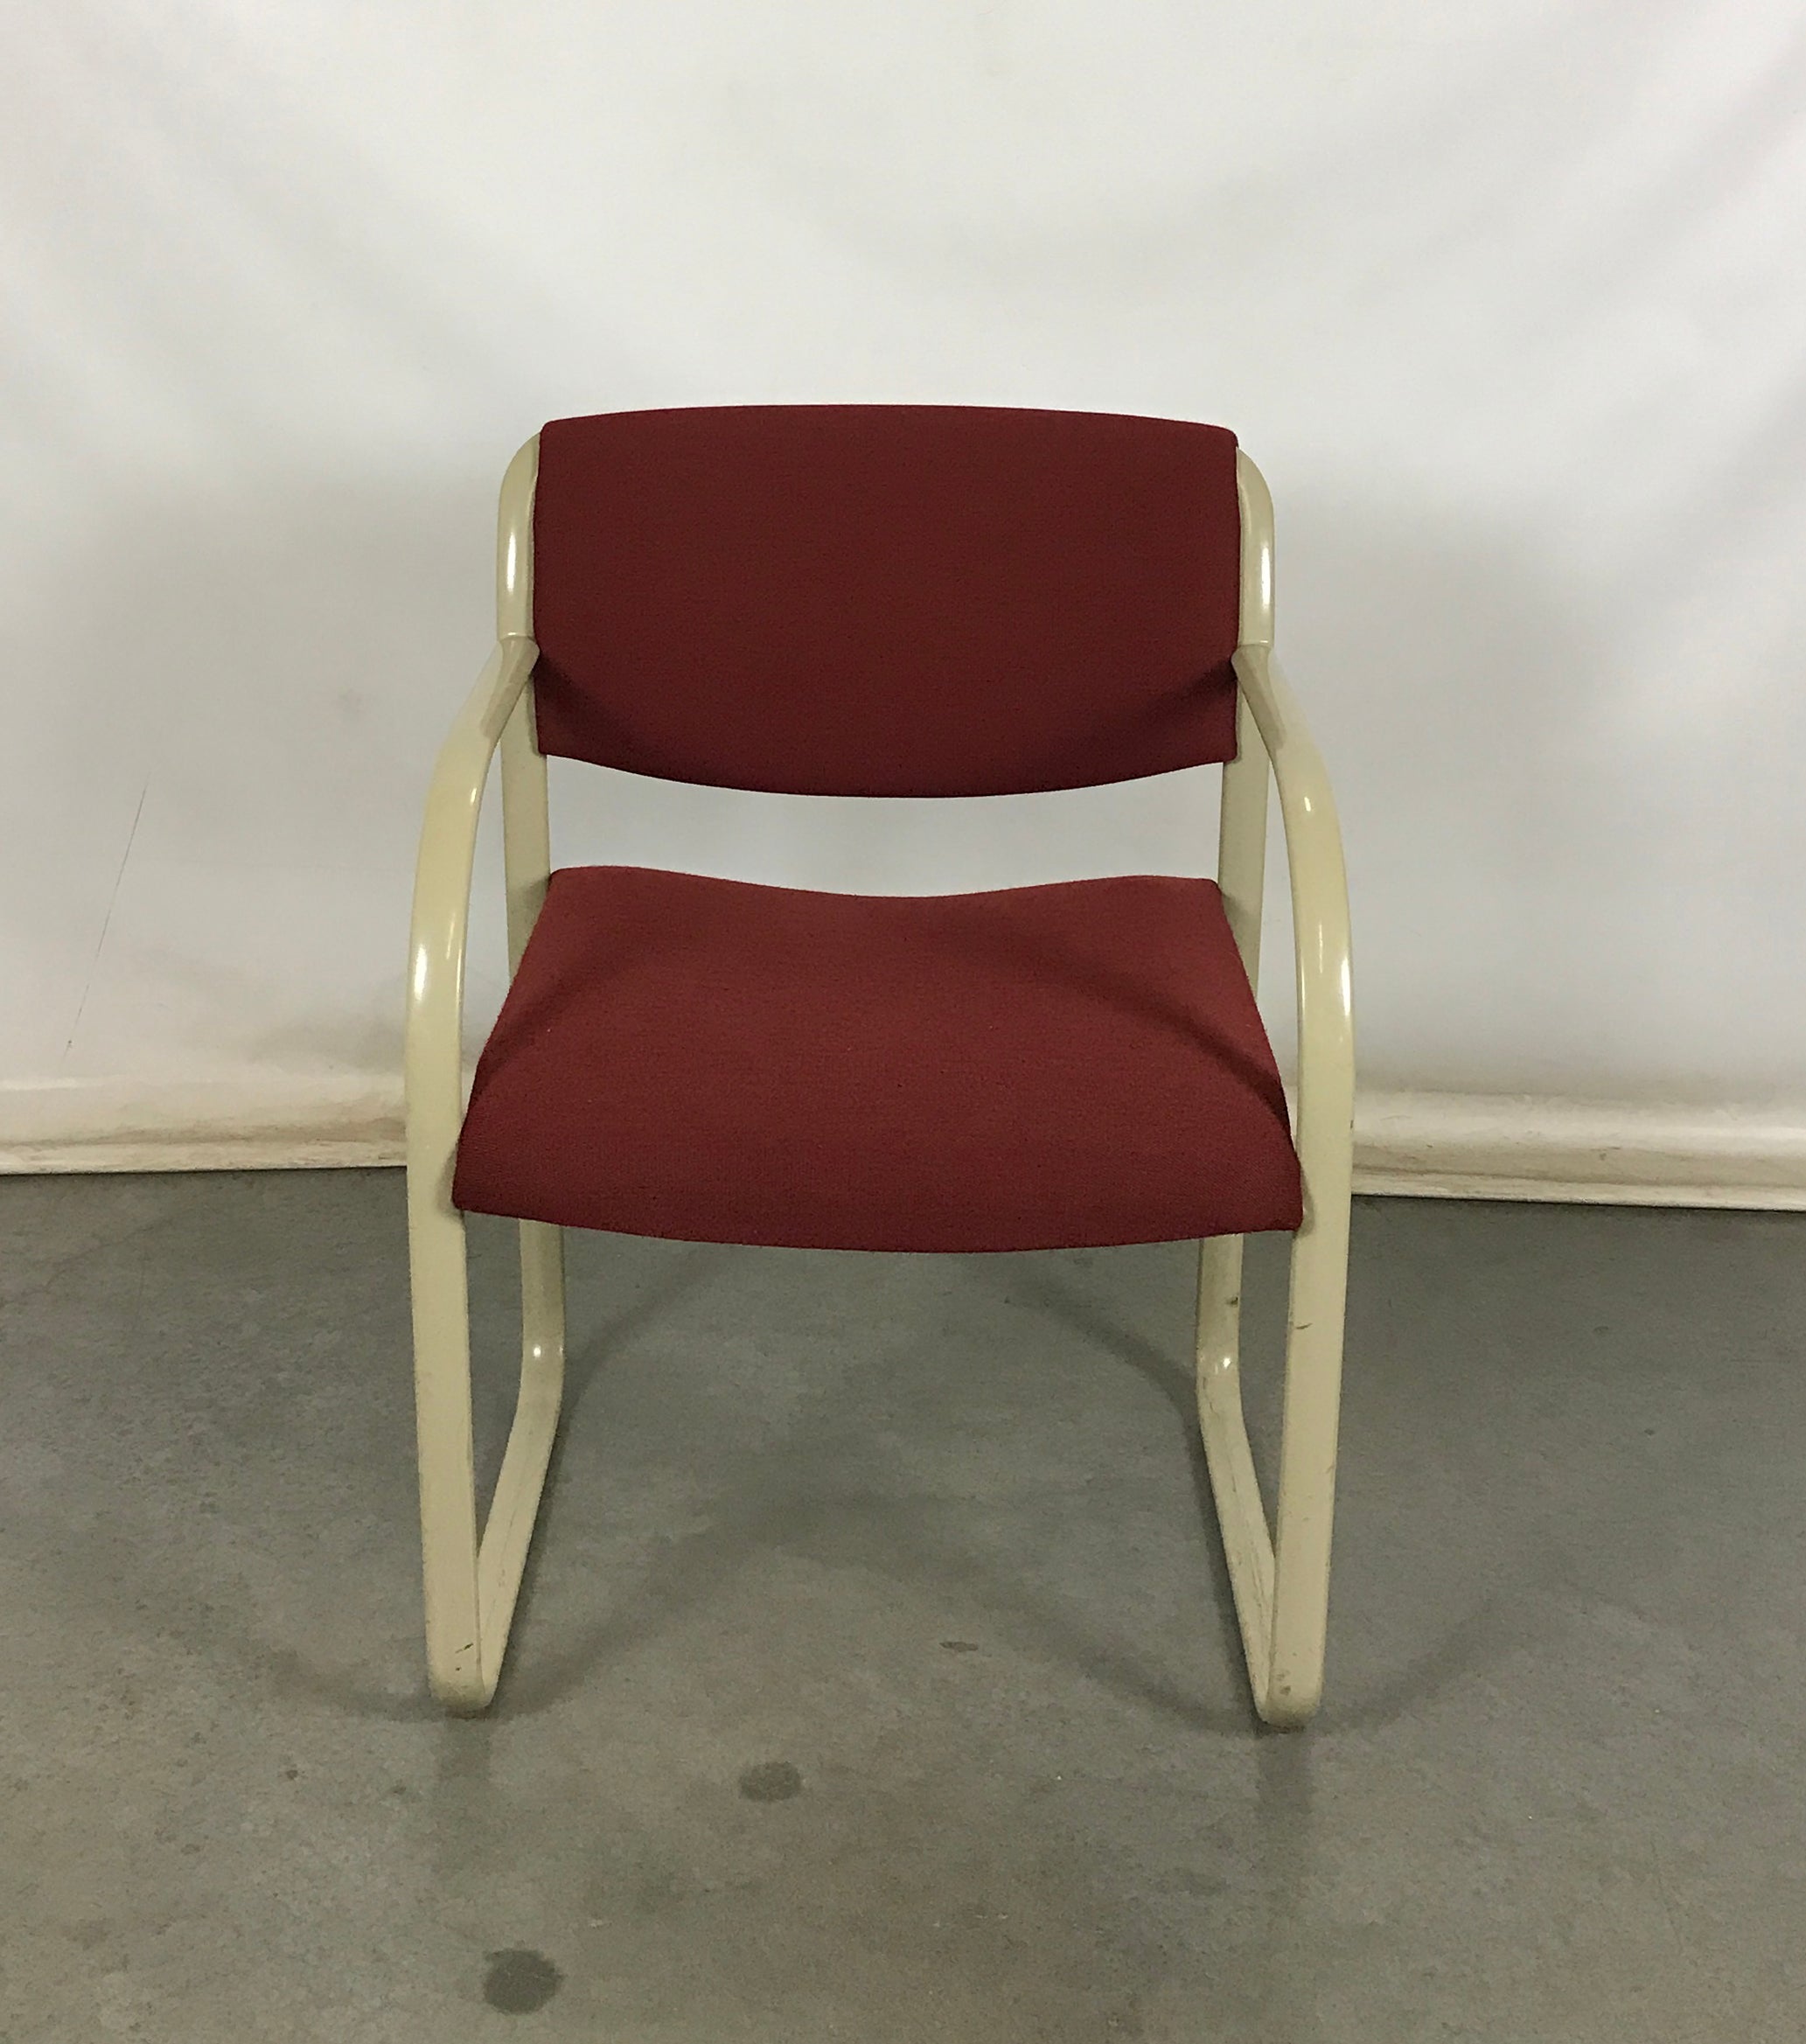 Steelcase Red Chair